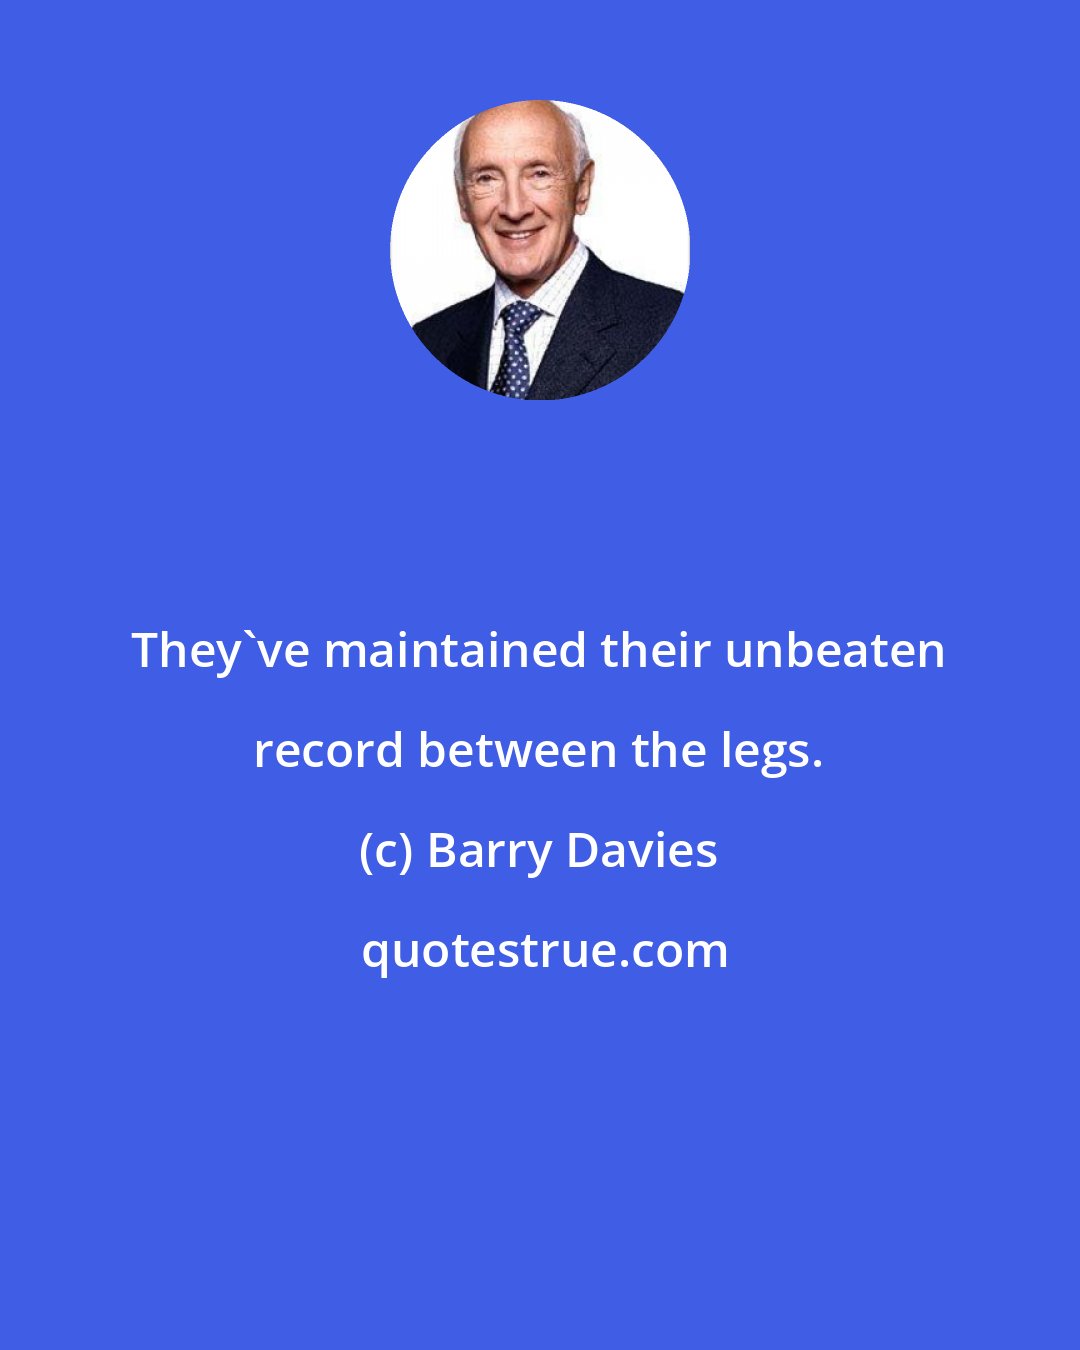 Barry Davies: They've maintained their unbeaten record between the legs.